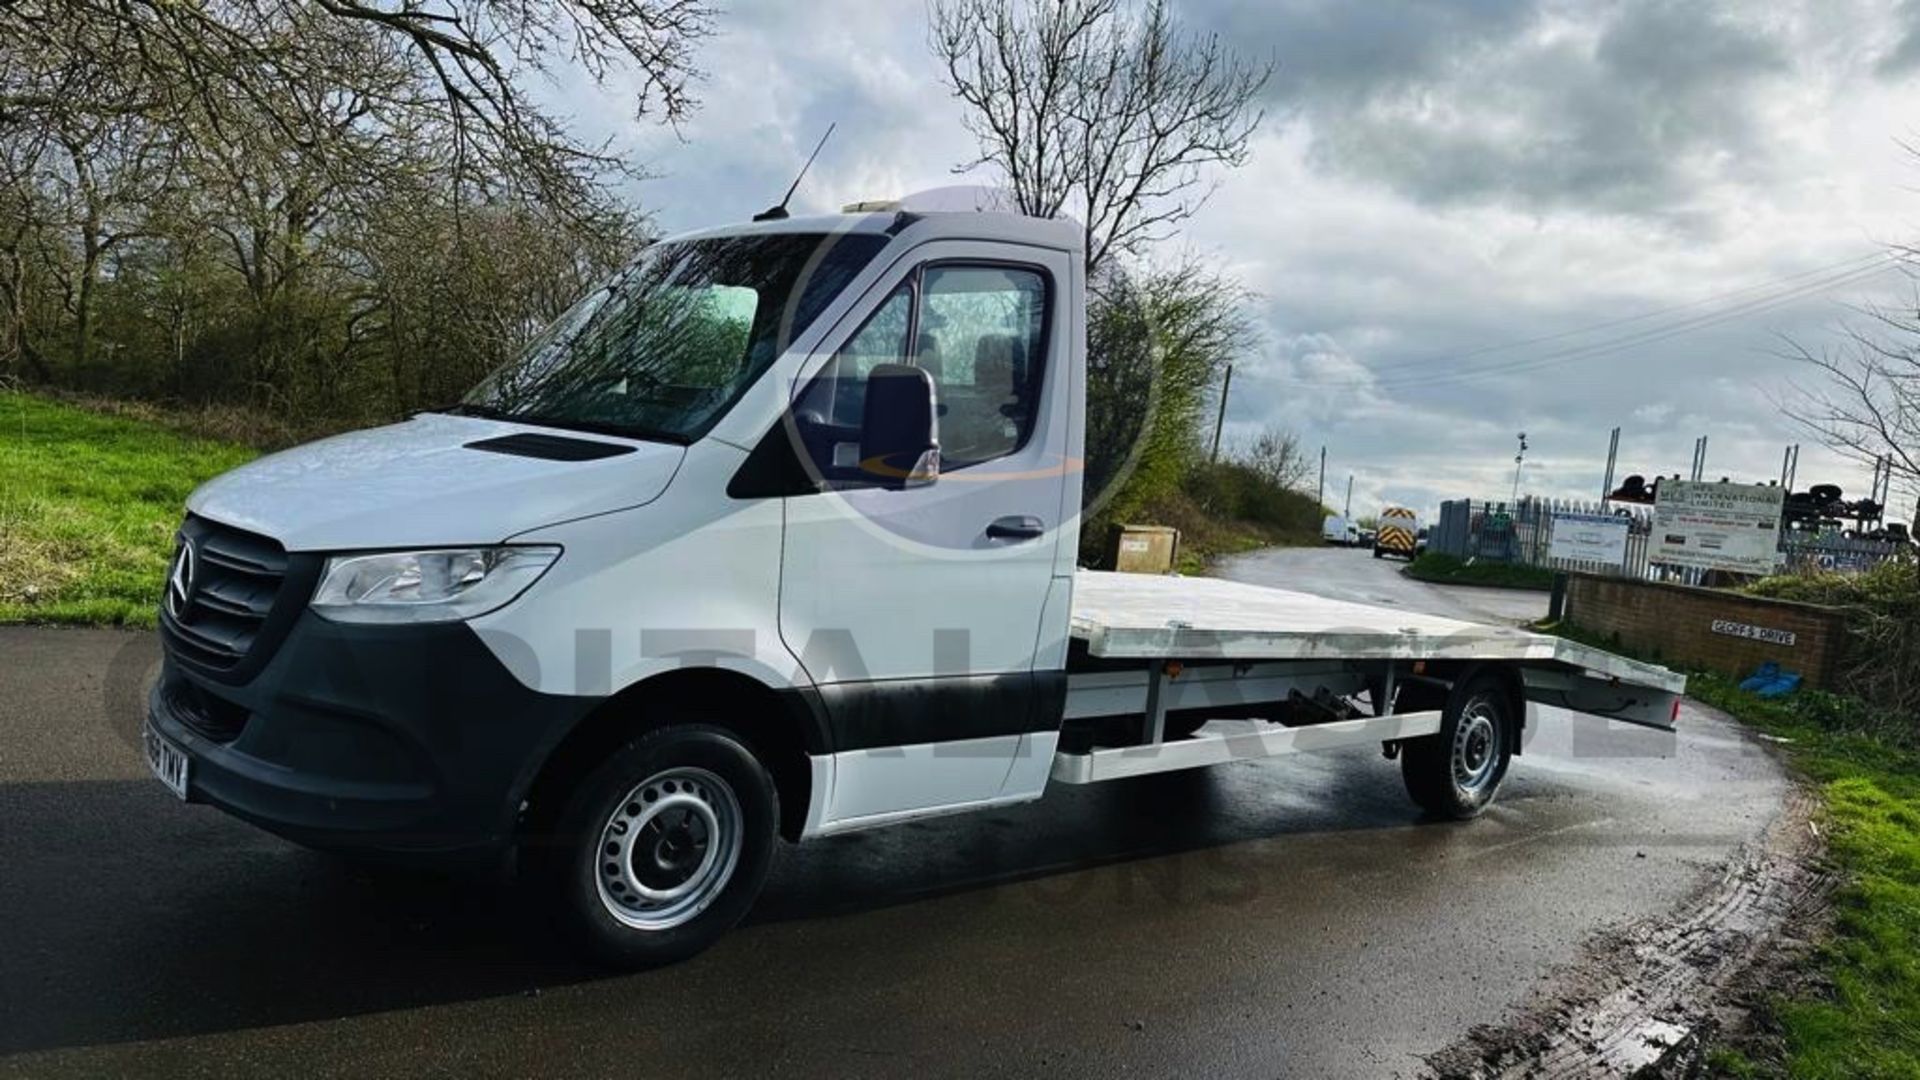 MERCEDES SPRINTER 314CDI "LWB RECOVERY TRUCK" 2019 MODEL - 1 OWNER - NEW BODY FITTED WITH ELEC WINCH - Image 9 of 37